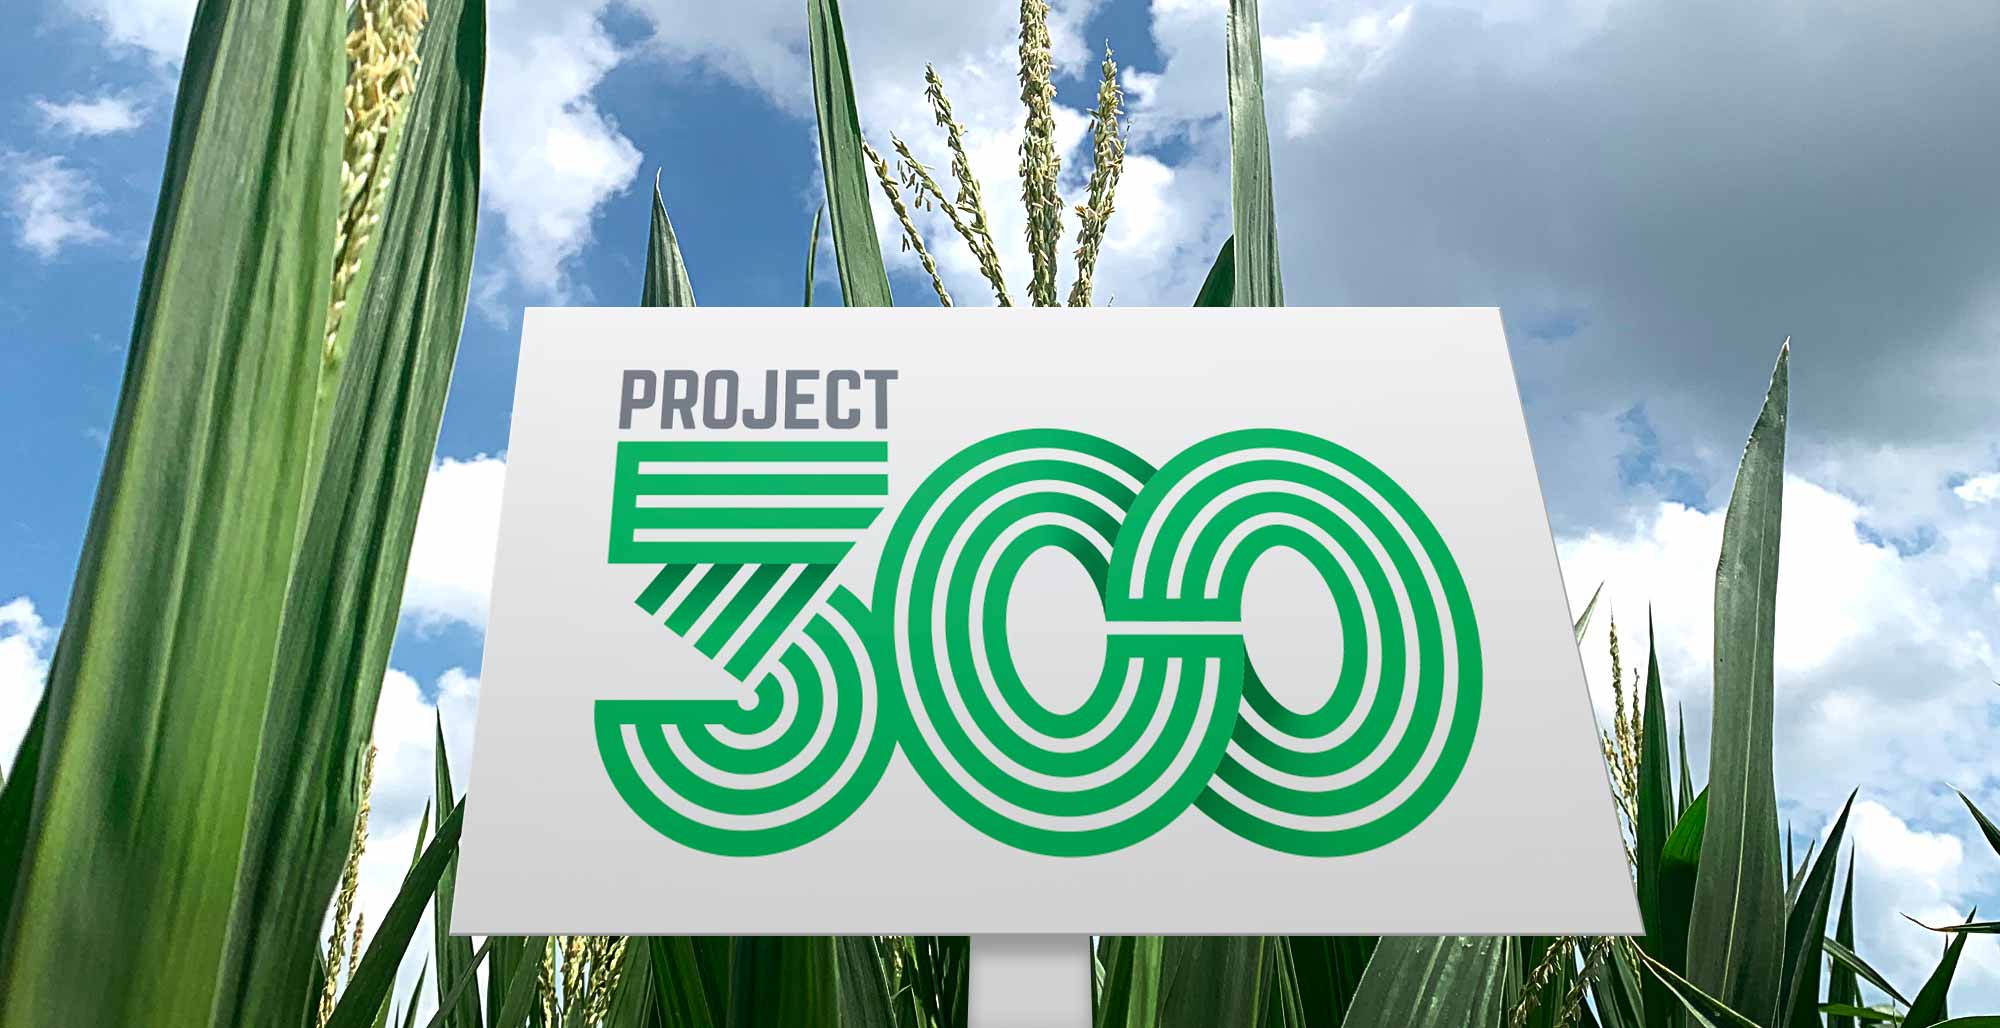 Project 300